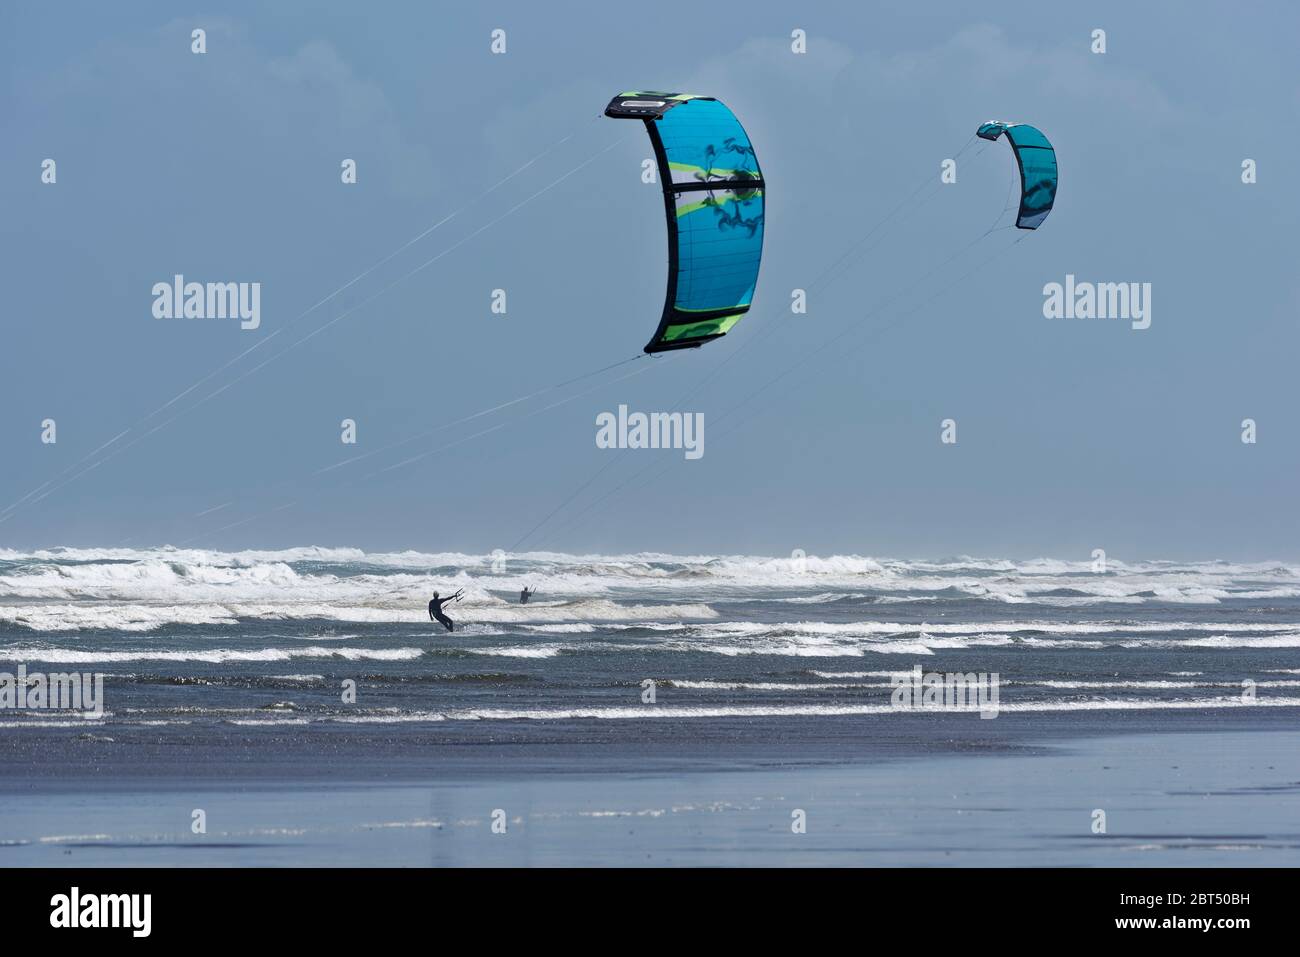 A couple of kite surfers amongst the waves near the shore on a windy day Stock Photo